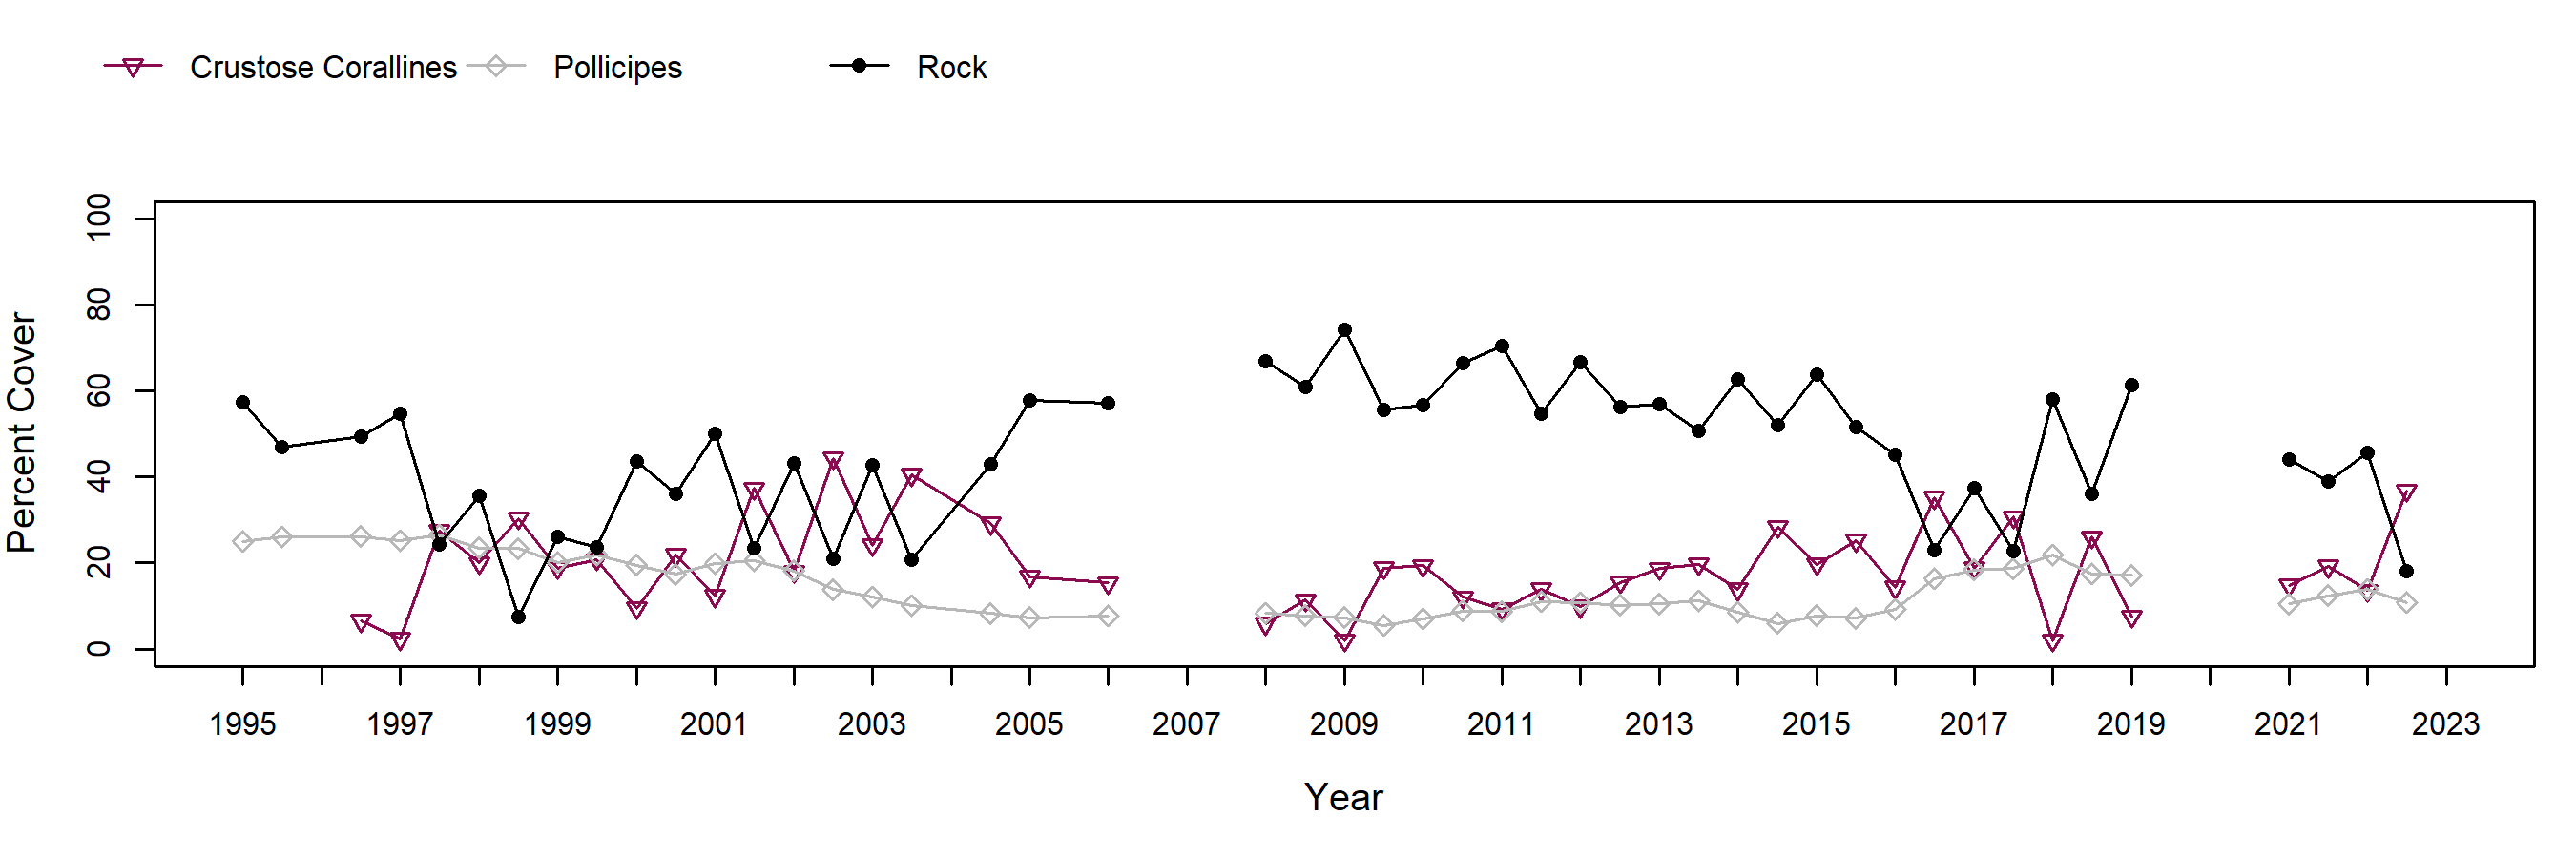 Navy South Pollicipes trend plot